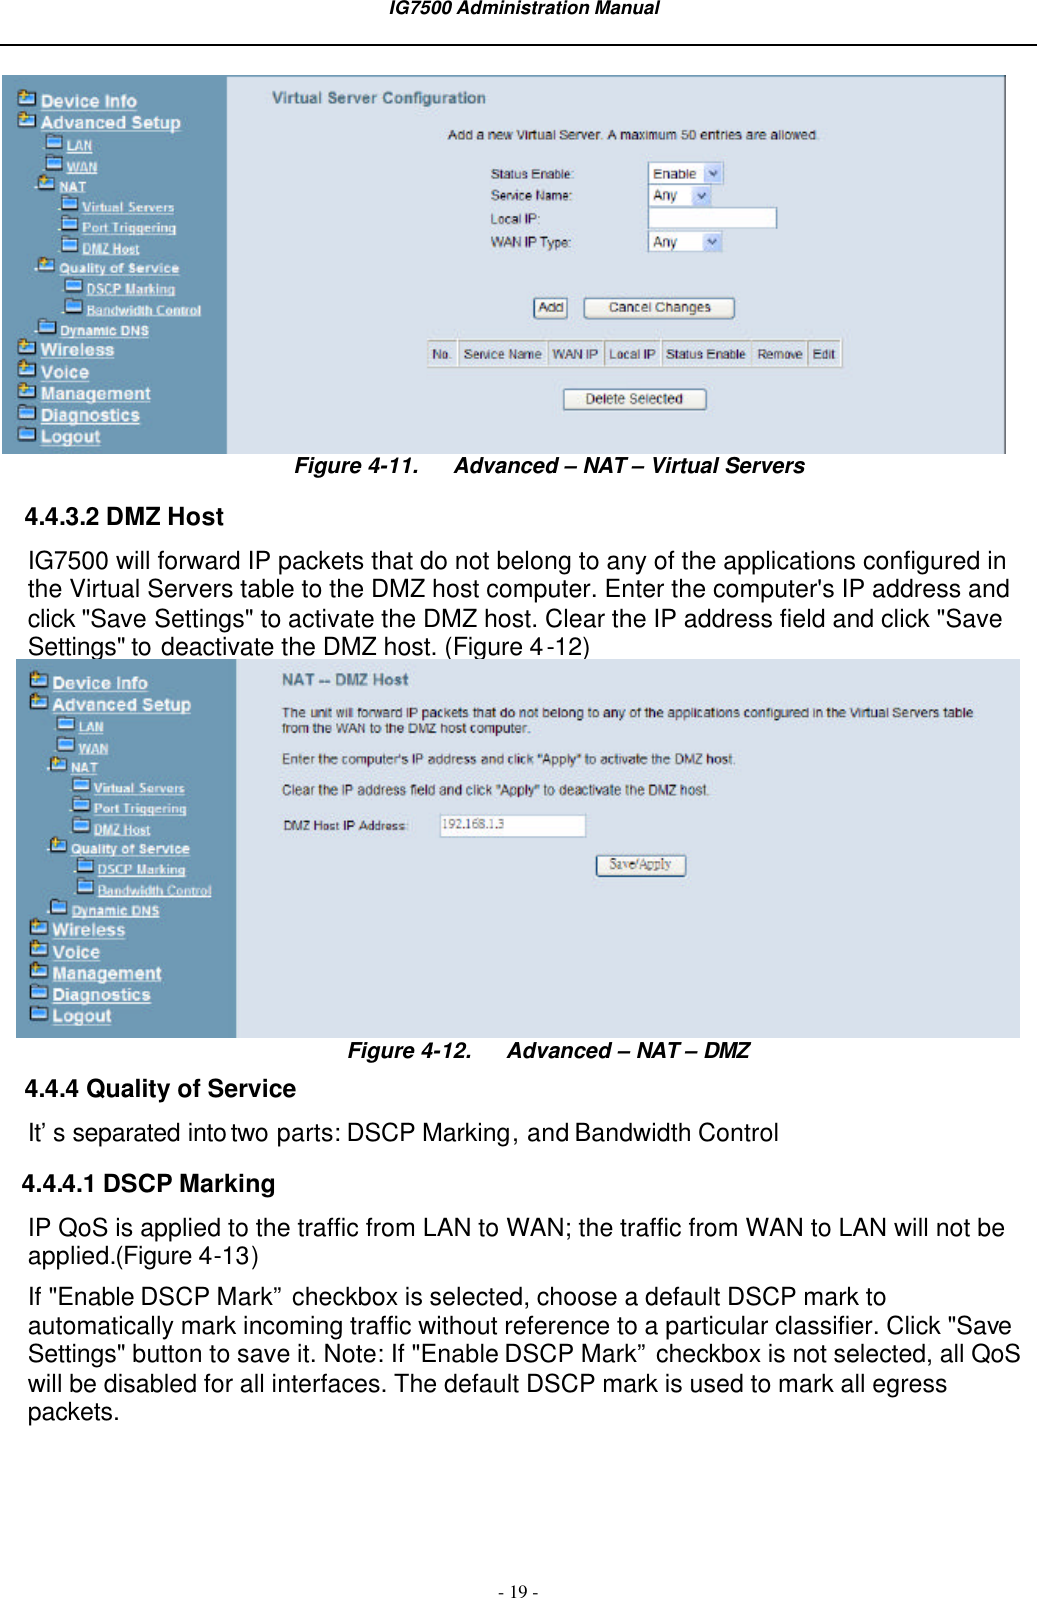  IG7500 Administration Manual  - 19 -  Figure 4-11. Advanced – NAT – Virtual Servers 4.4.3.2 DMZ Host IG7500 will forward IP packets that do not belong to any of the applications configured in the Virtual Servers table to the DMZ host computer. Enter the computer&apos;s IP address and click &quot;Save Settings&quot; to activate the DMZ host. Clear the IP address field and click &quot;Save Settings&quot; to deactivate the DMZ host. (Figure 4-12)  Figure 4-12. Advanced – NAT – DMZ 4.4.4 Quality of Service It’s separated into two parts: DSCP Marking, and Bandwidth Control 4.4.4.1 DSCP Marking IP QoS is applied to the traffic from LAN to WAN; the traffic from WAN to LAN will not be applied.(Figure 4-13) If &quot;Enable DSCP Mark” checkbox is selected, choose a default DSCP mark to automatically mark incoming traffic without reference to a particular classifier. Click &quot;Save Settings&quot; button to save it. Note: If &quot;Enable DSCP Mark” checkbox is not selected, all QoS will be disabled for all interfaces. The default DSCP mark is used to mark all egress packets. 